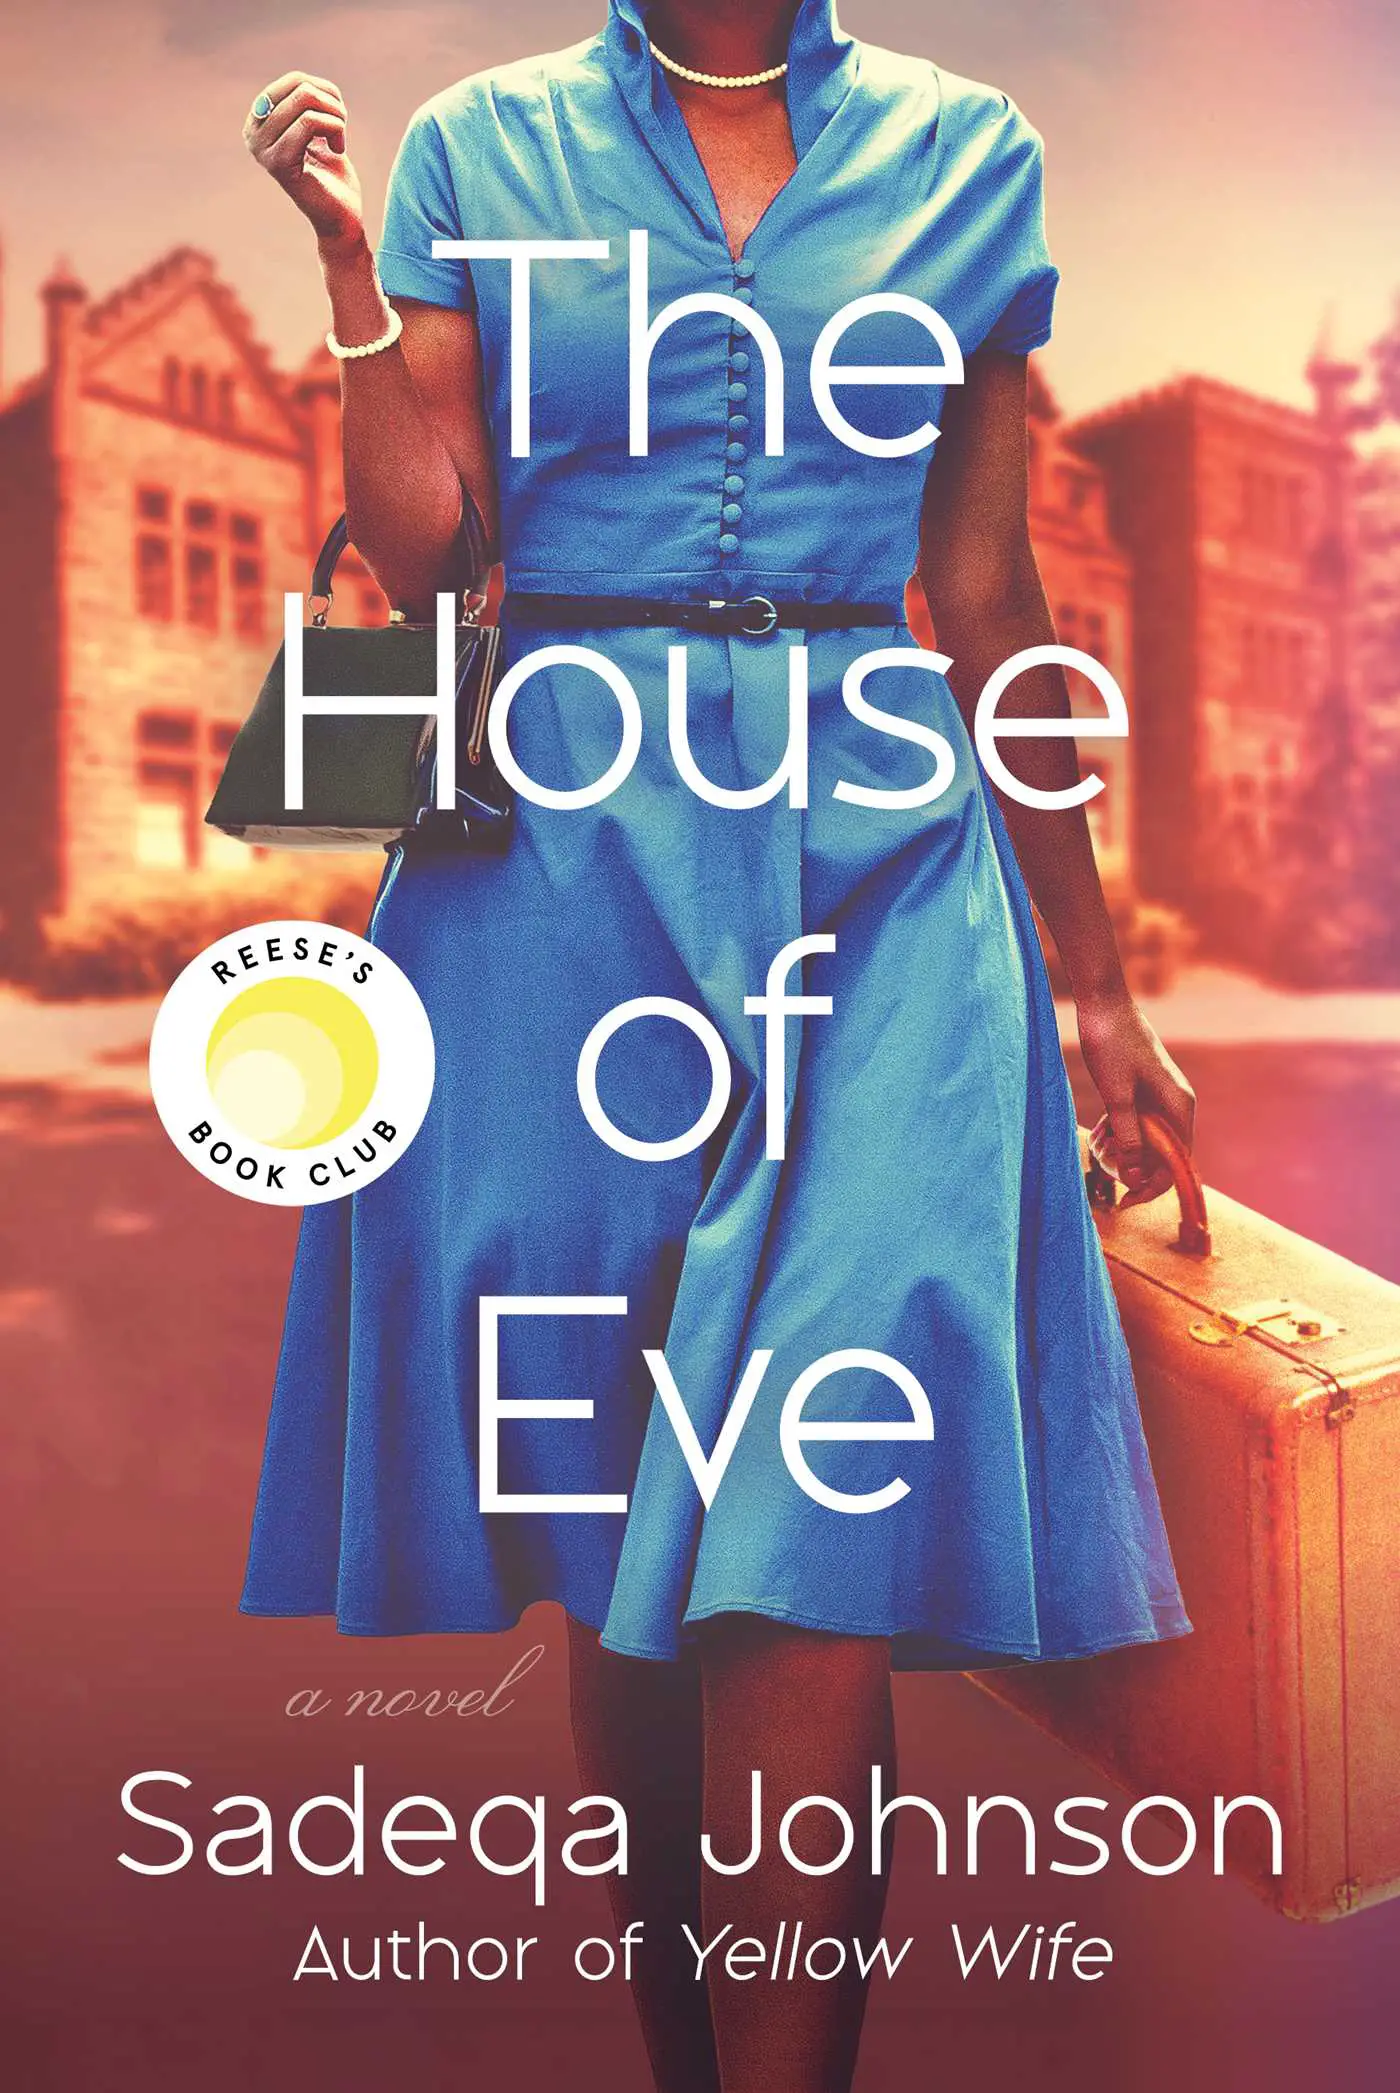 [Download] The House of Eve by Sadeqa Johnson  pdf book